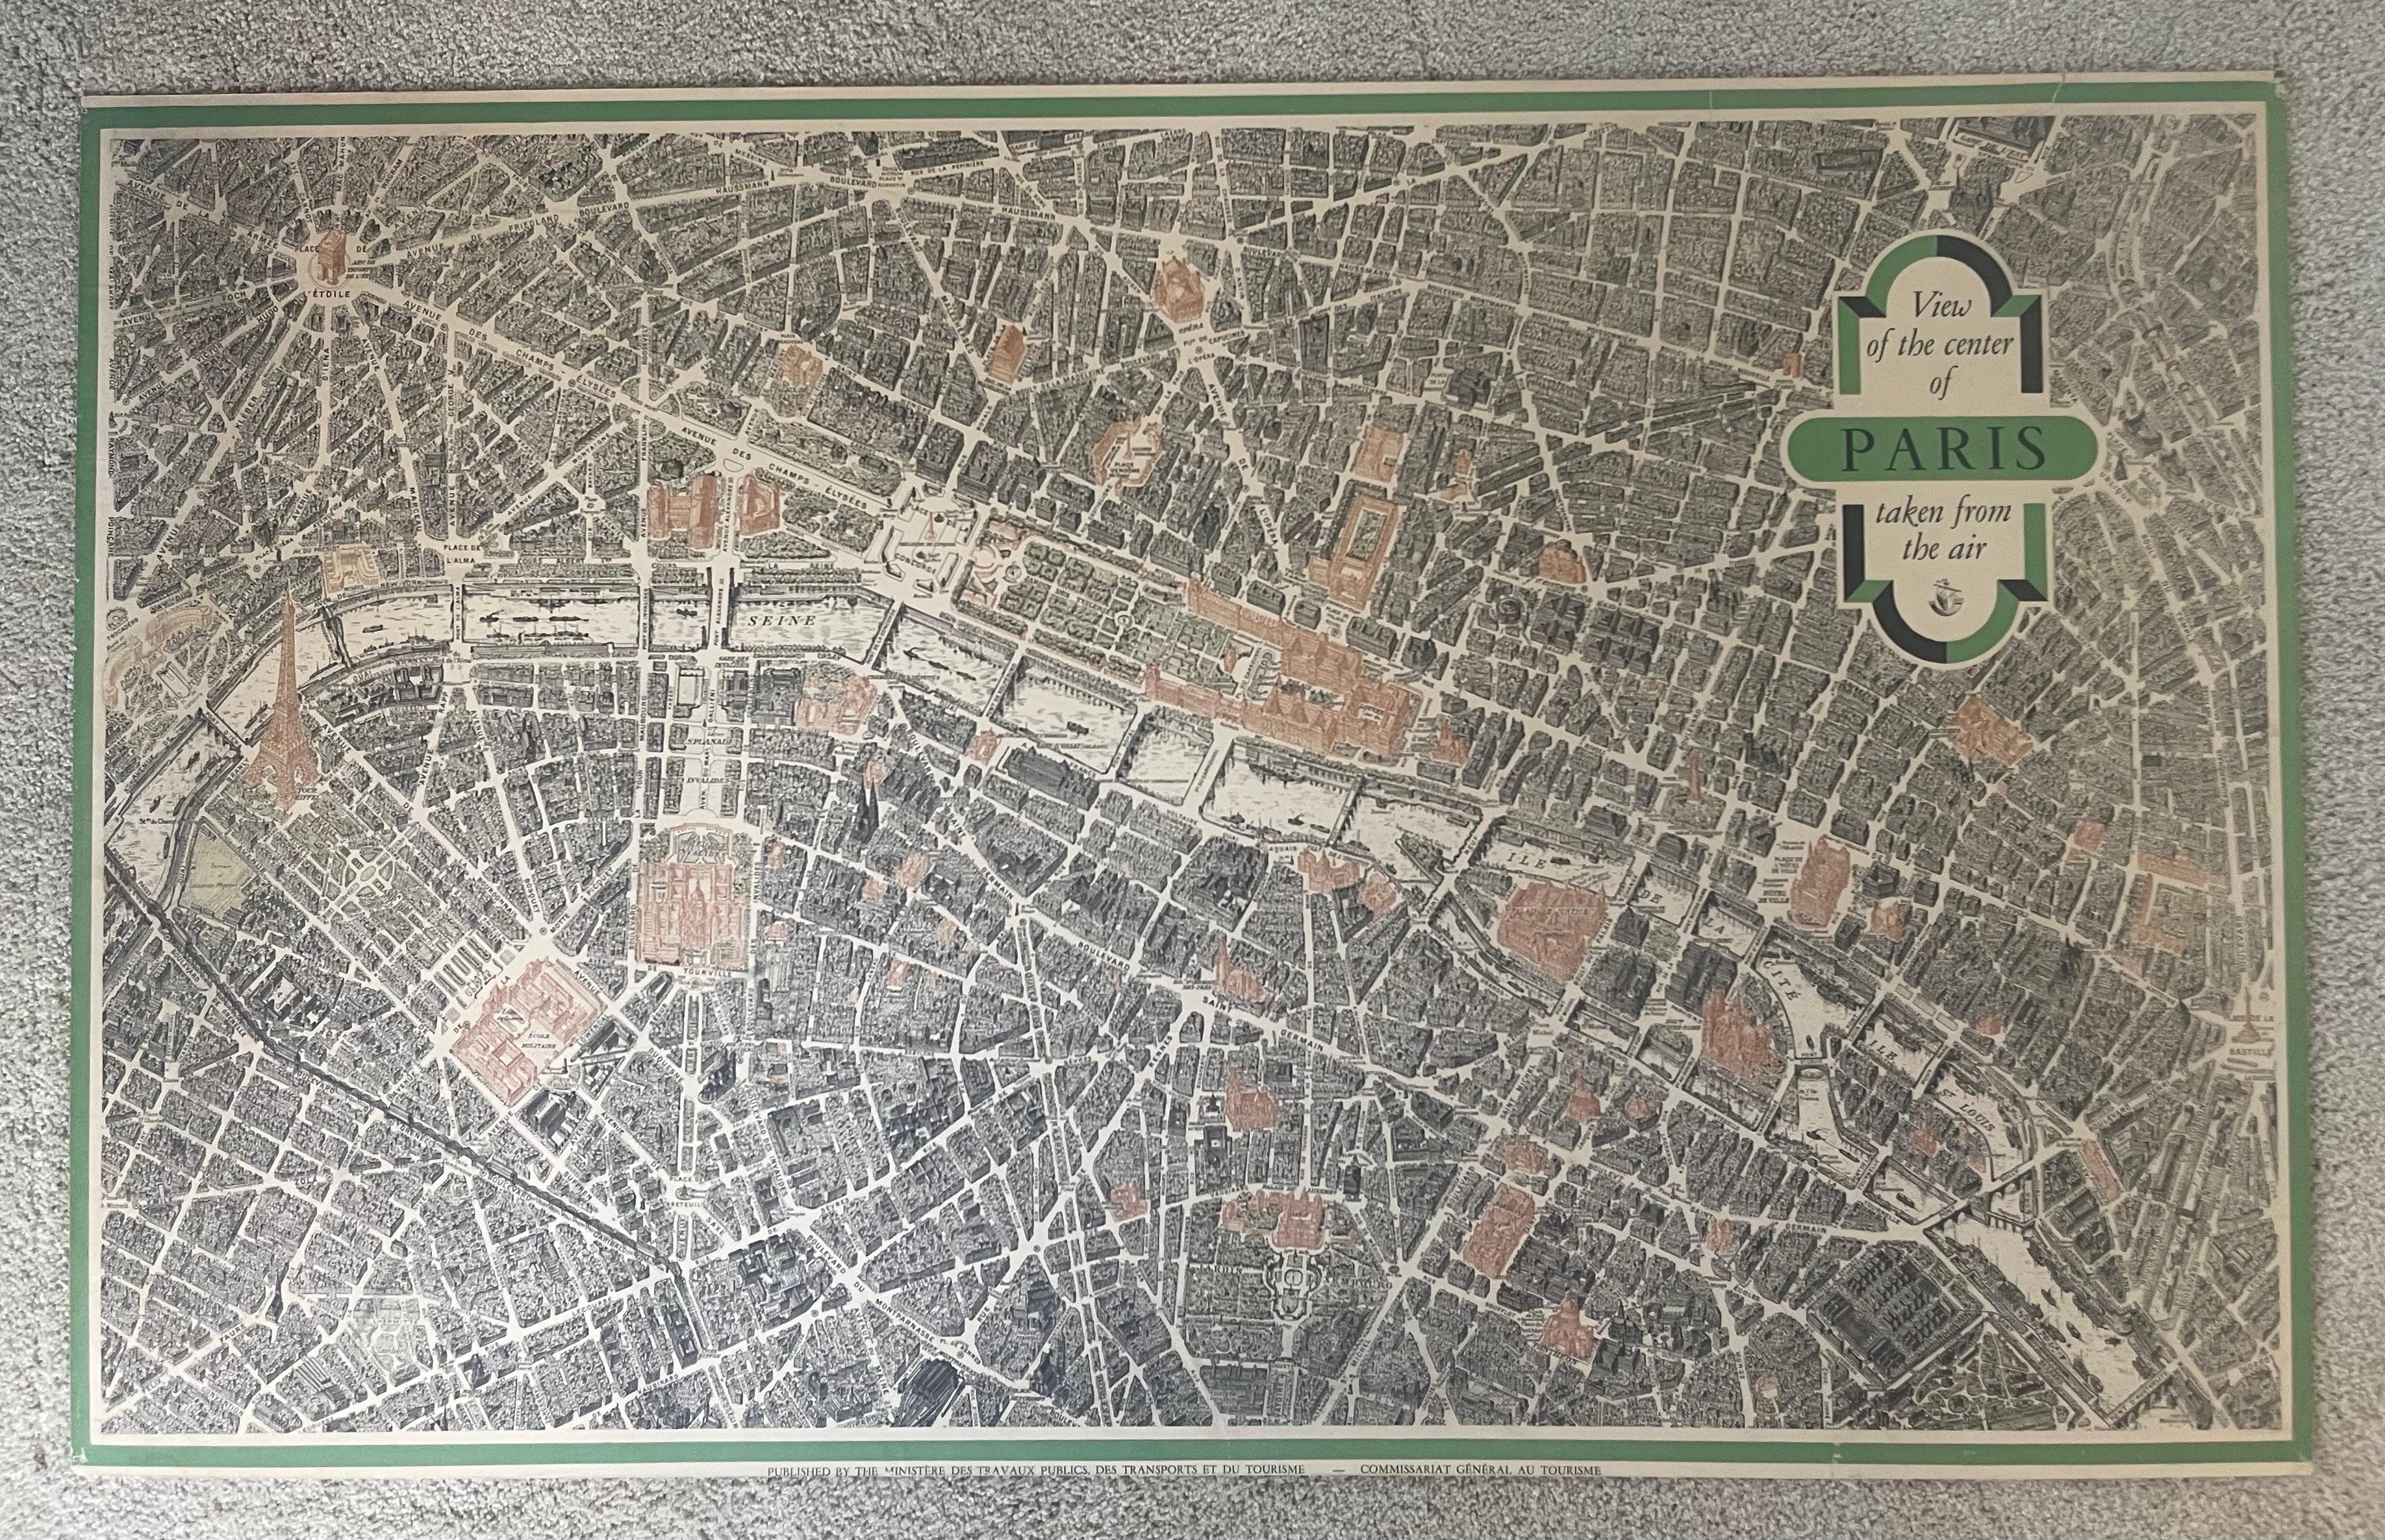 Lithographiekarte „View of the Center of Paris Taken from the Air“ im Angebot 10